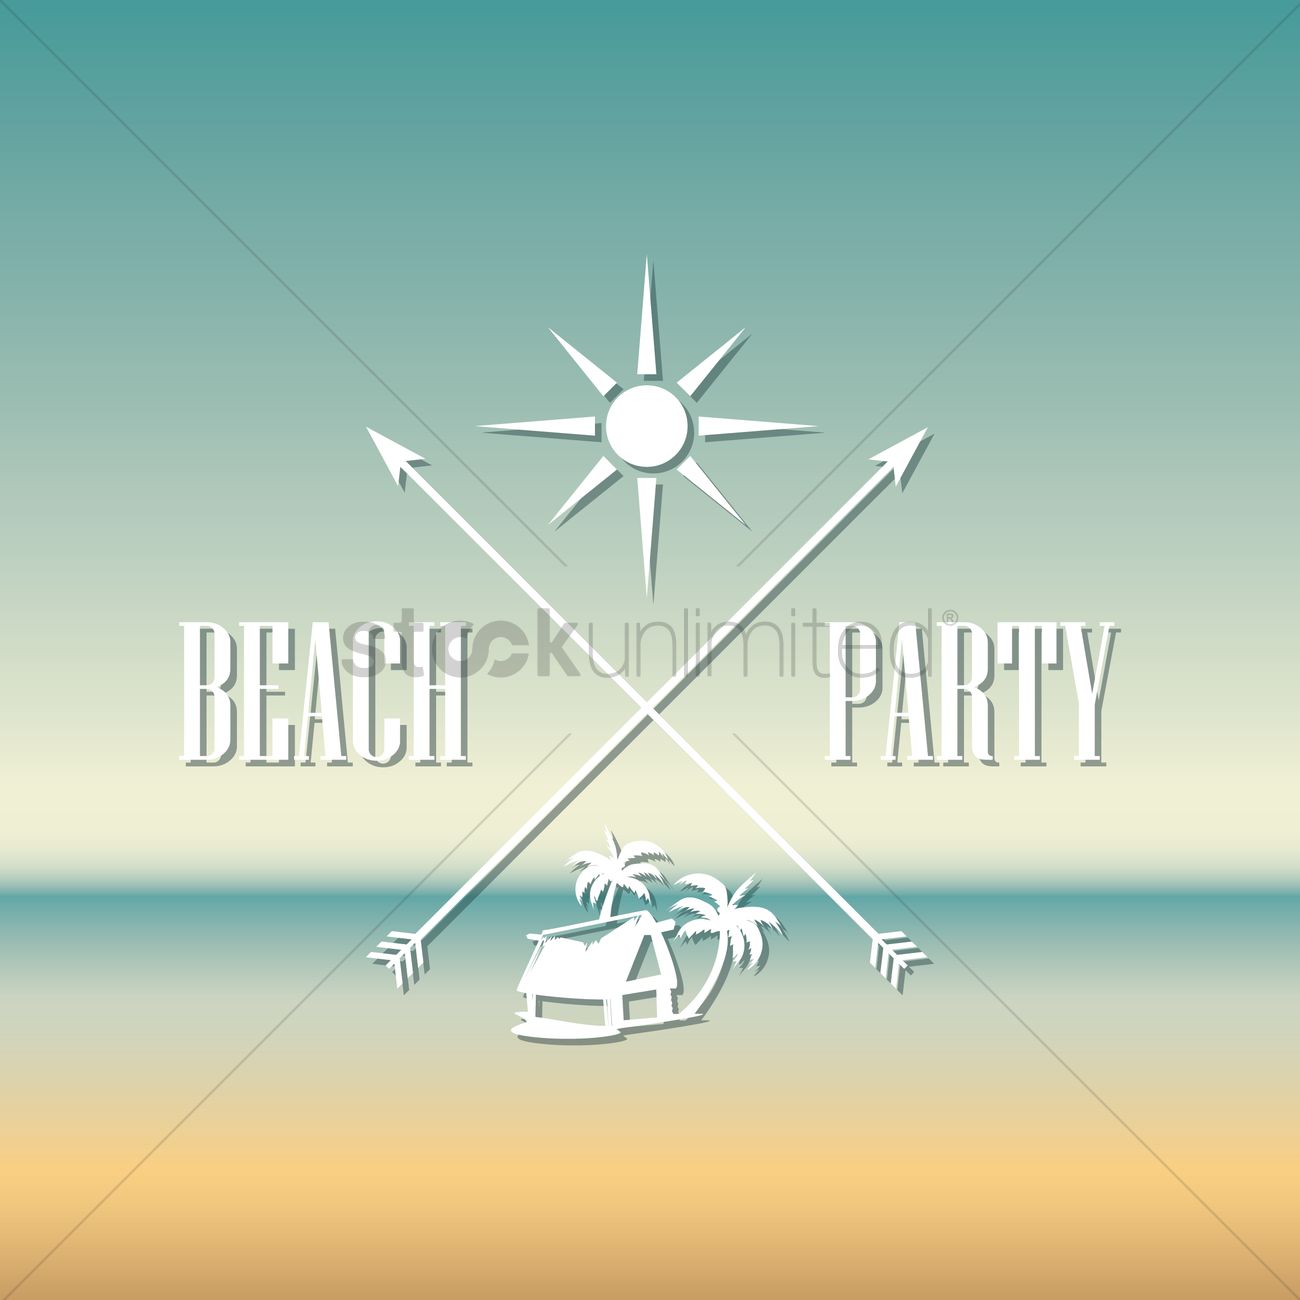 Beach Party Wallpaper Vector Image Stockunlimited